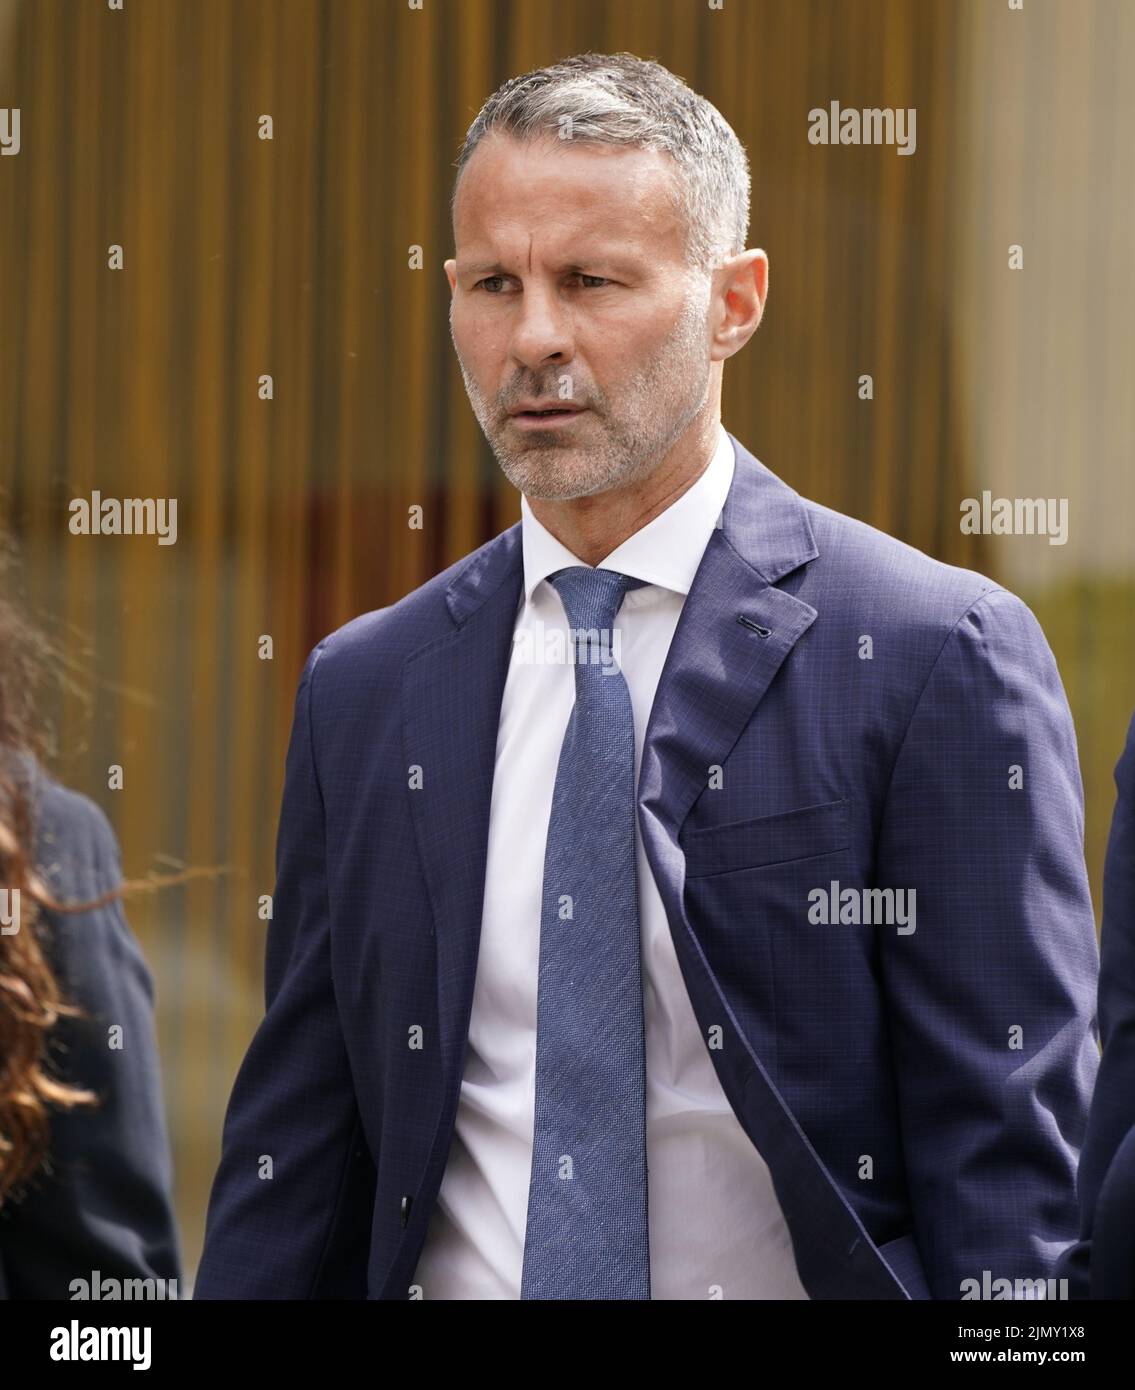 File photo dated 23/07/21 of former Manchester United footballer Ryan Giggs, who will go on trial on Monday accused of assaulting and controlling his ex-girlfriend. Giggs, 48, is accused of using controlling and coercive behaviour against Kate Greville, 36, between August 2017 and November 2020. Issue date: Monday August 8, 2022. Stock Photo